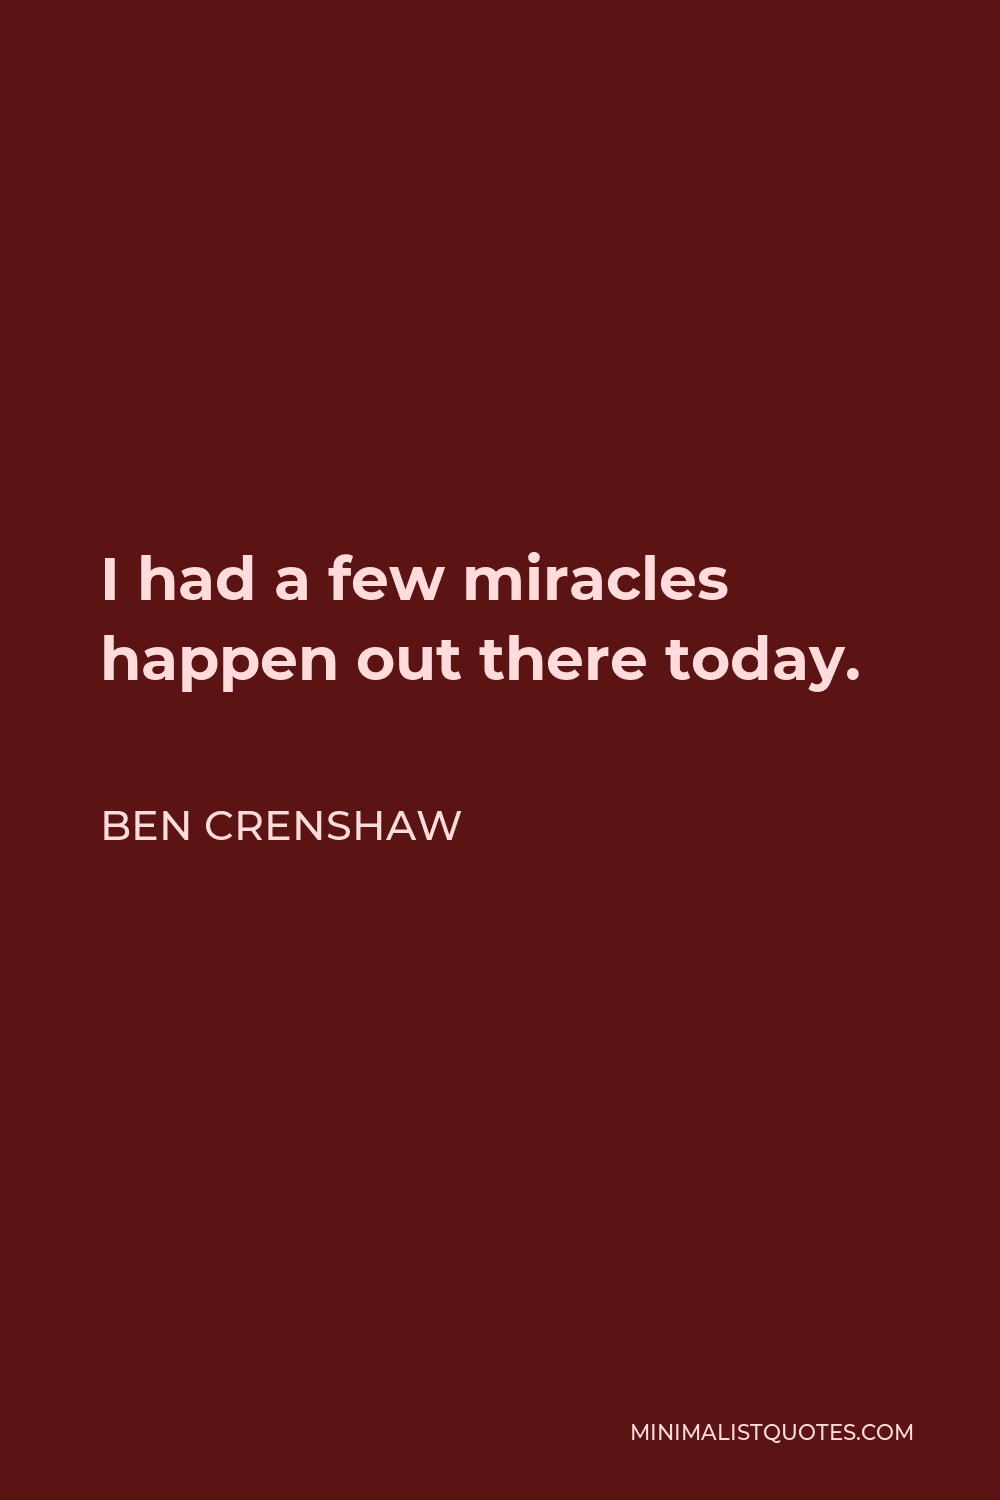 Ben Crenshaw Quote - I had a few miracles happen out there today.